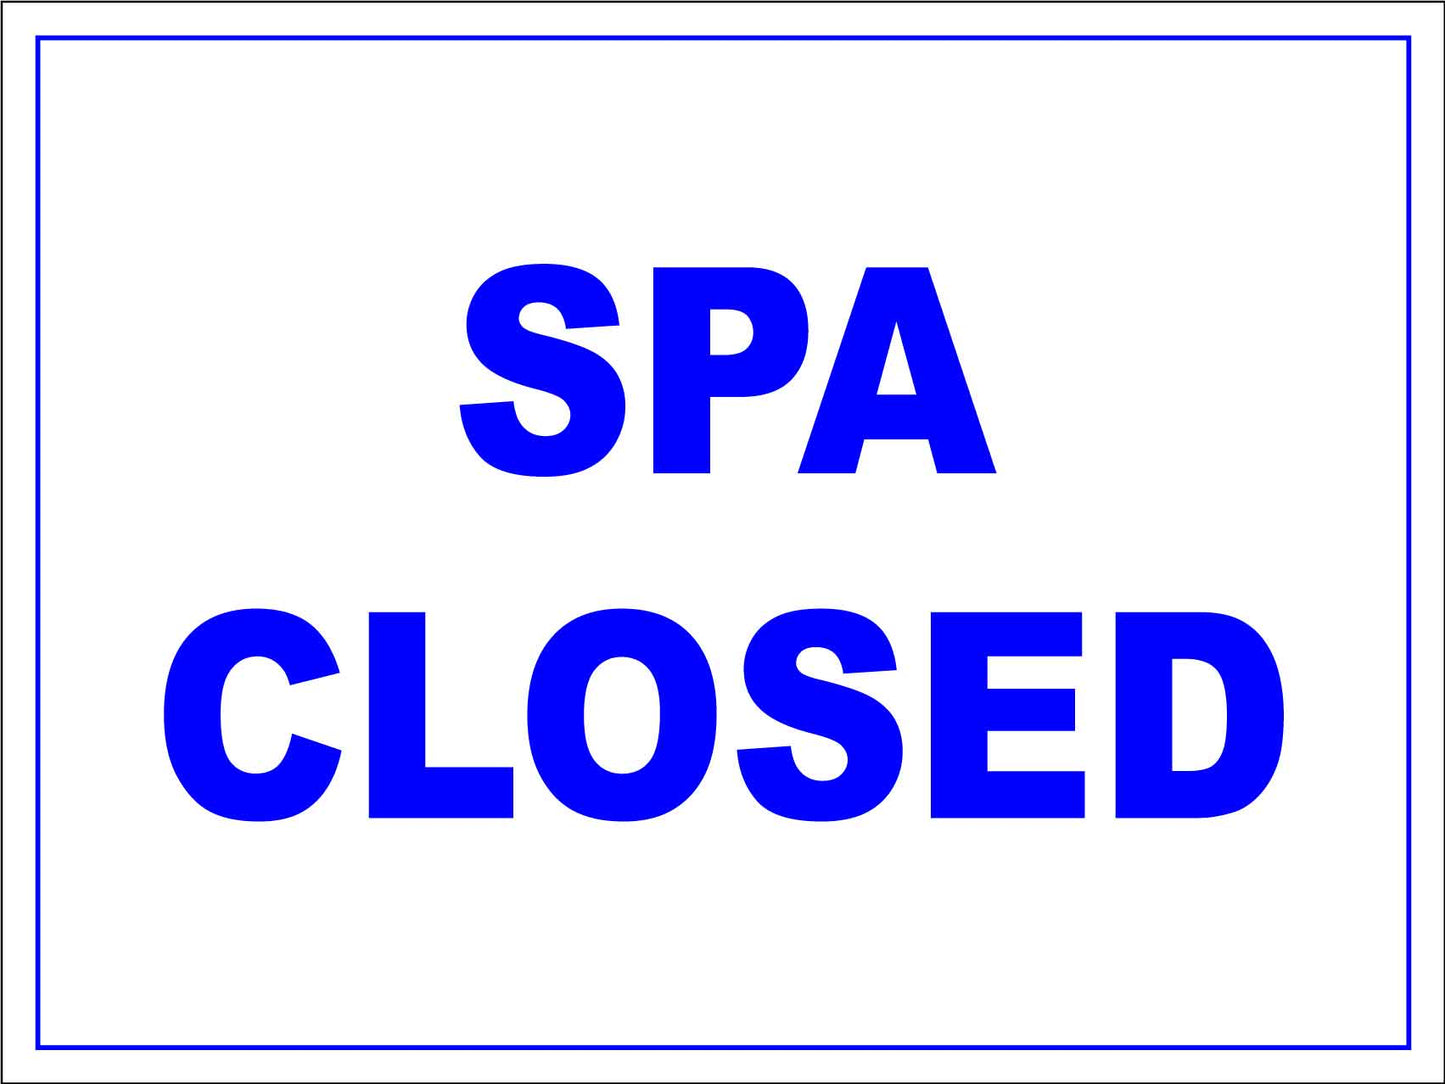 Spa Closed Sign